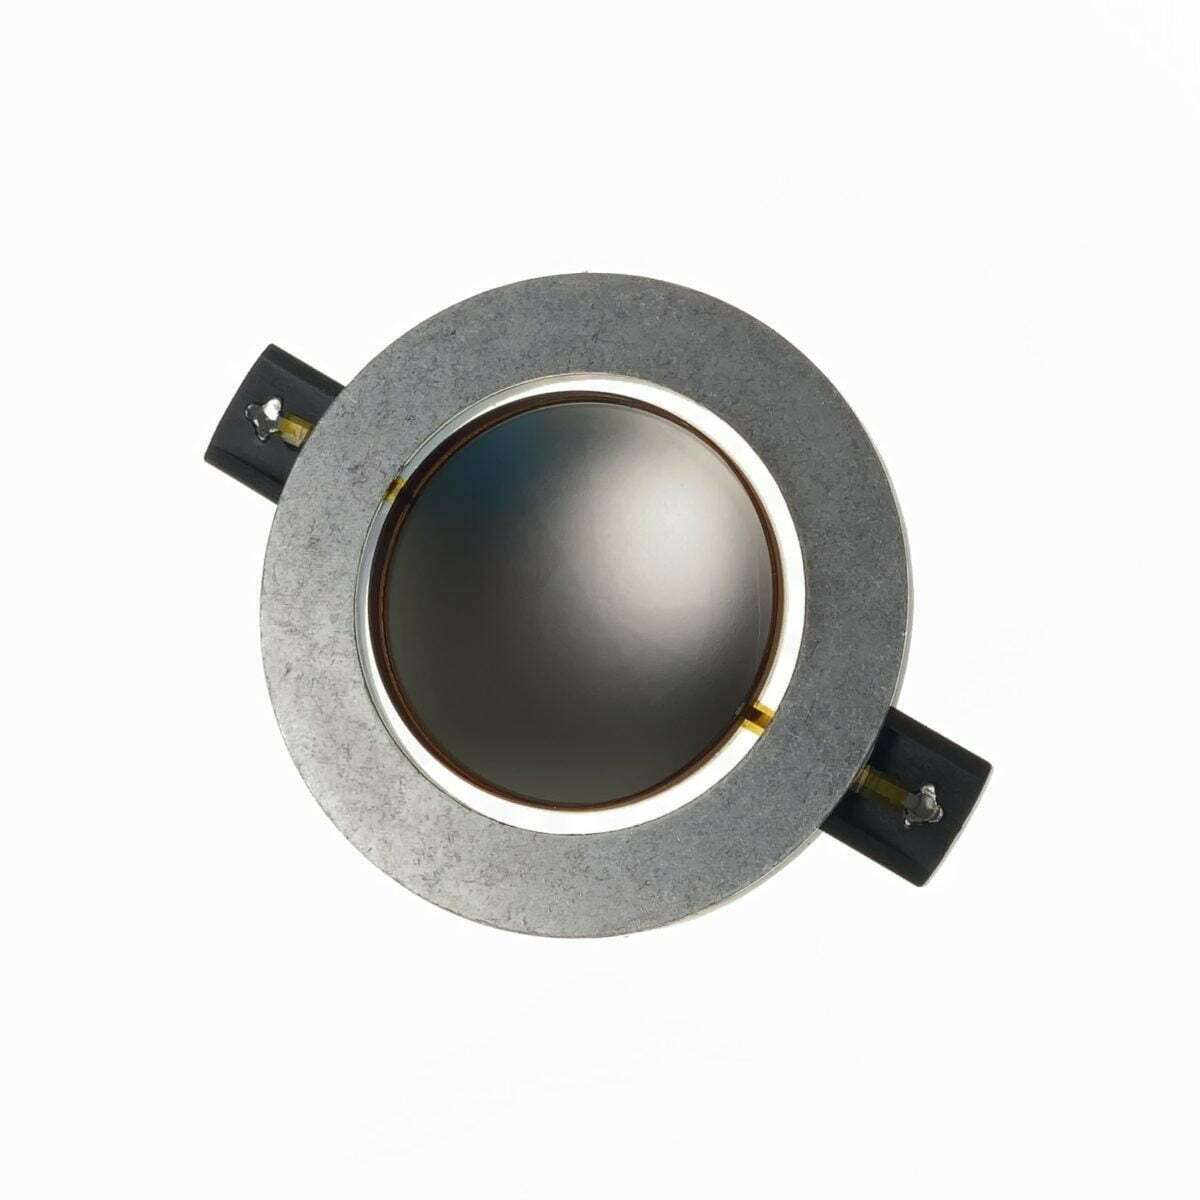 Replacement Diaphragm for Mackie M44ti from SRM450 Cabinet